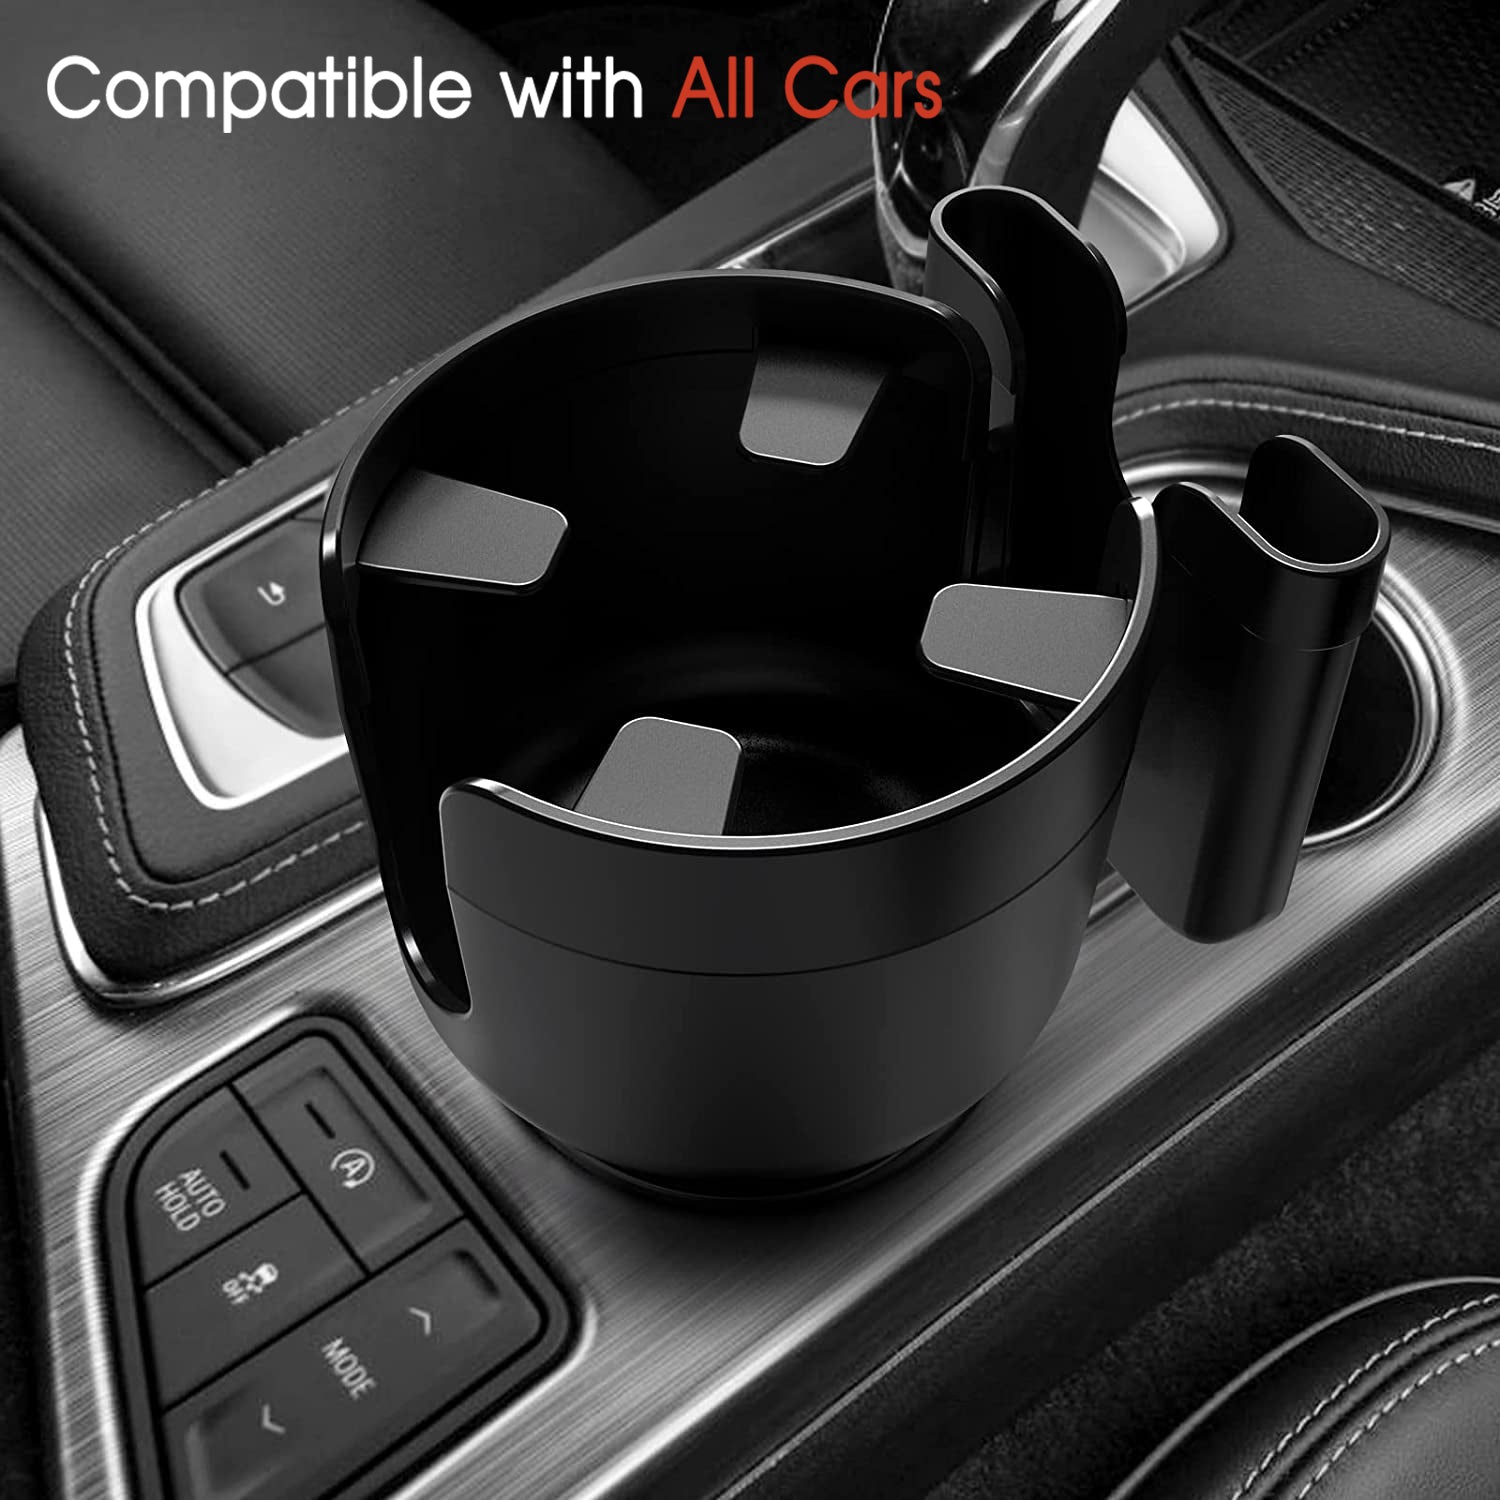 Custom Text For Car Cup Holder 2-in-1, Custom For Your Cars, Car Cup Holder Expander Adapter with Adjustable Base, Car Cup Holder Expander Organizer with Phone Holder AC15988